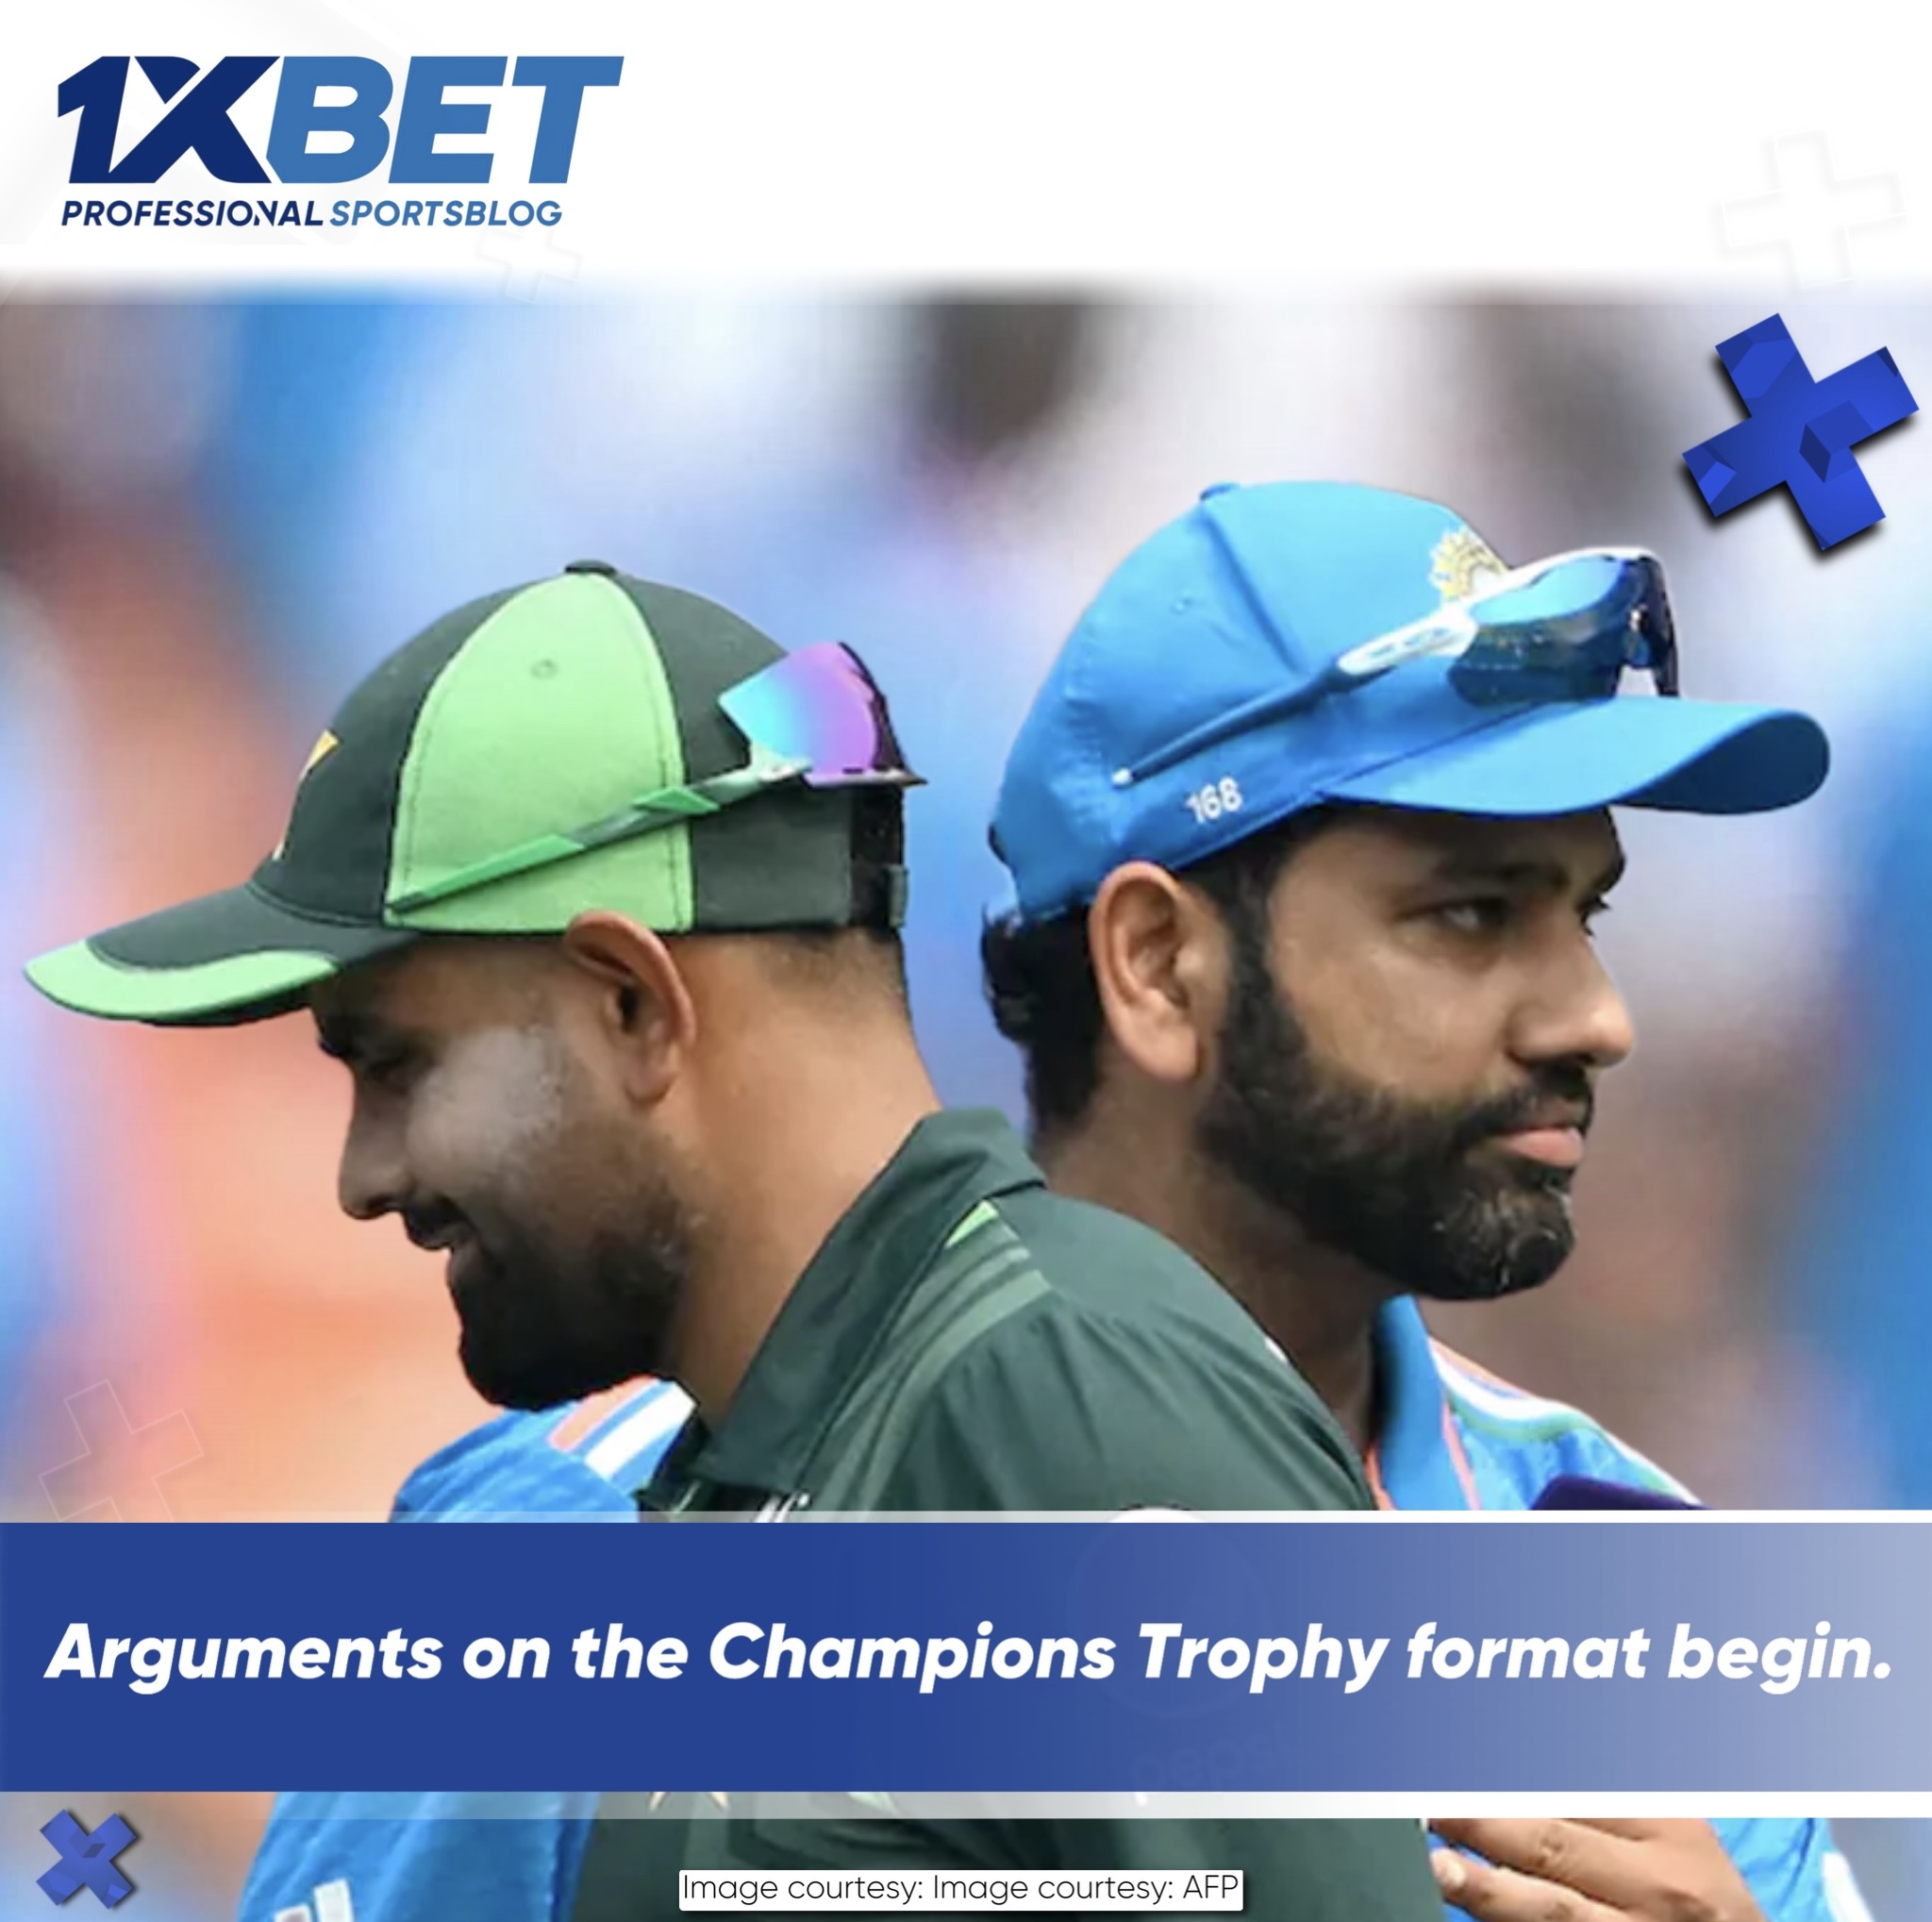 Arguments on the Champions Trophy format begin